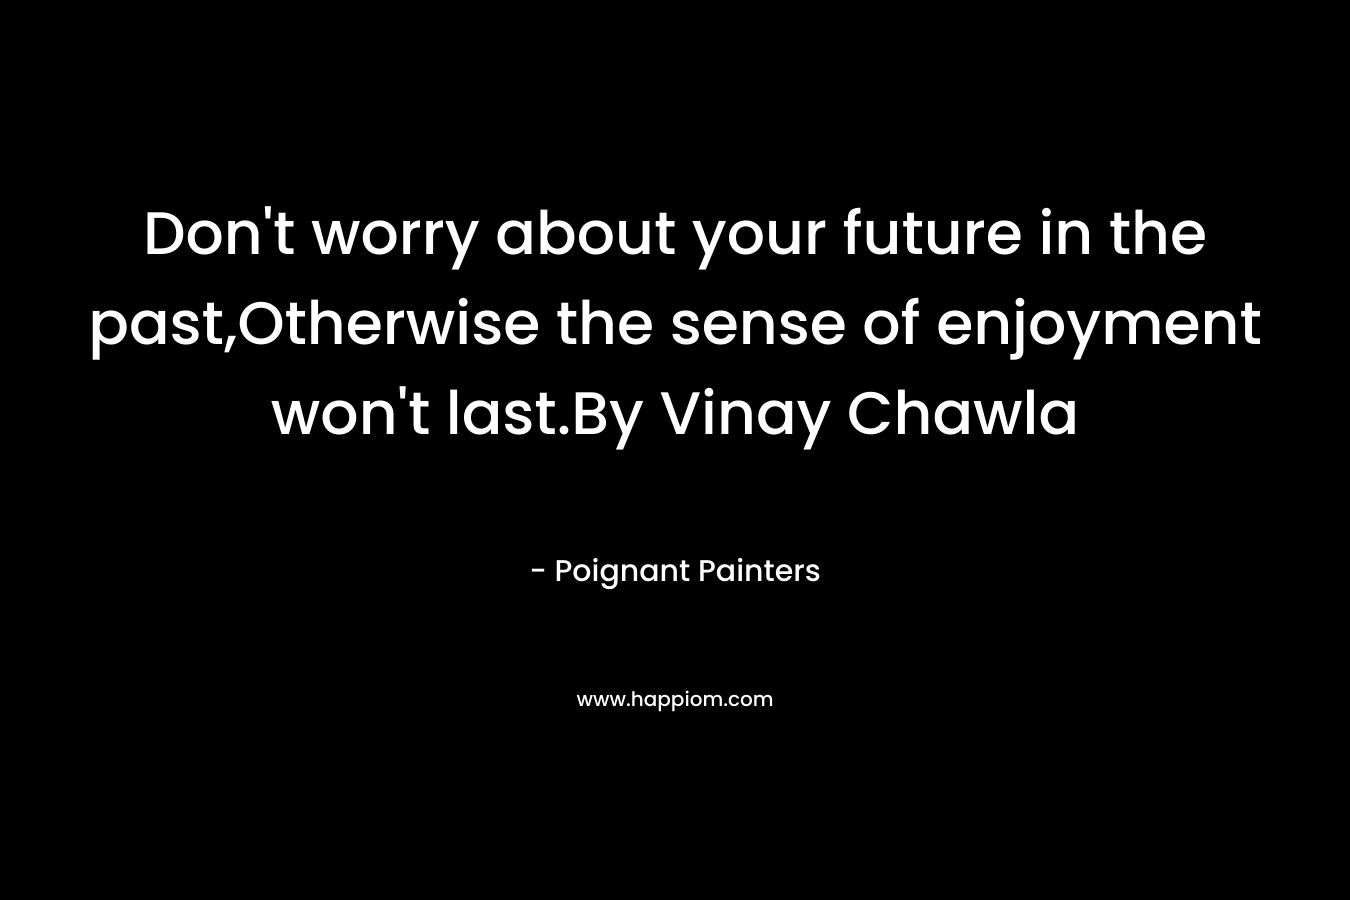 Don't worry about your future in the past,Otherwise the sense of enjoyment won't last.By Vinay Chawla